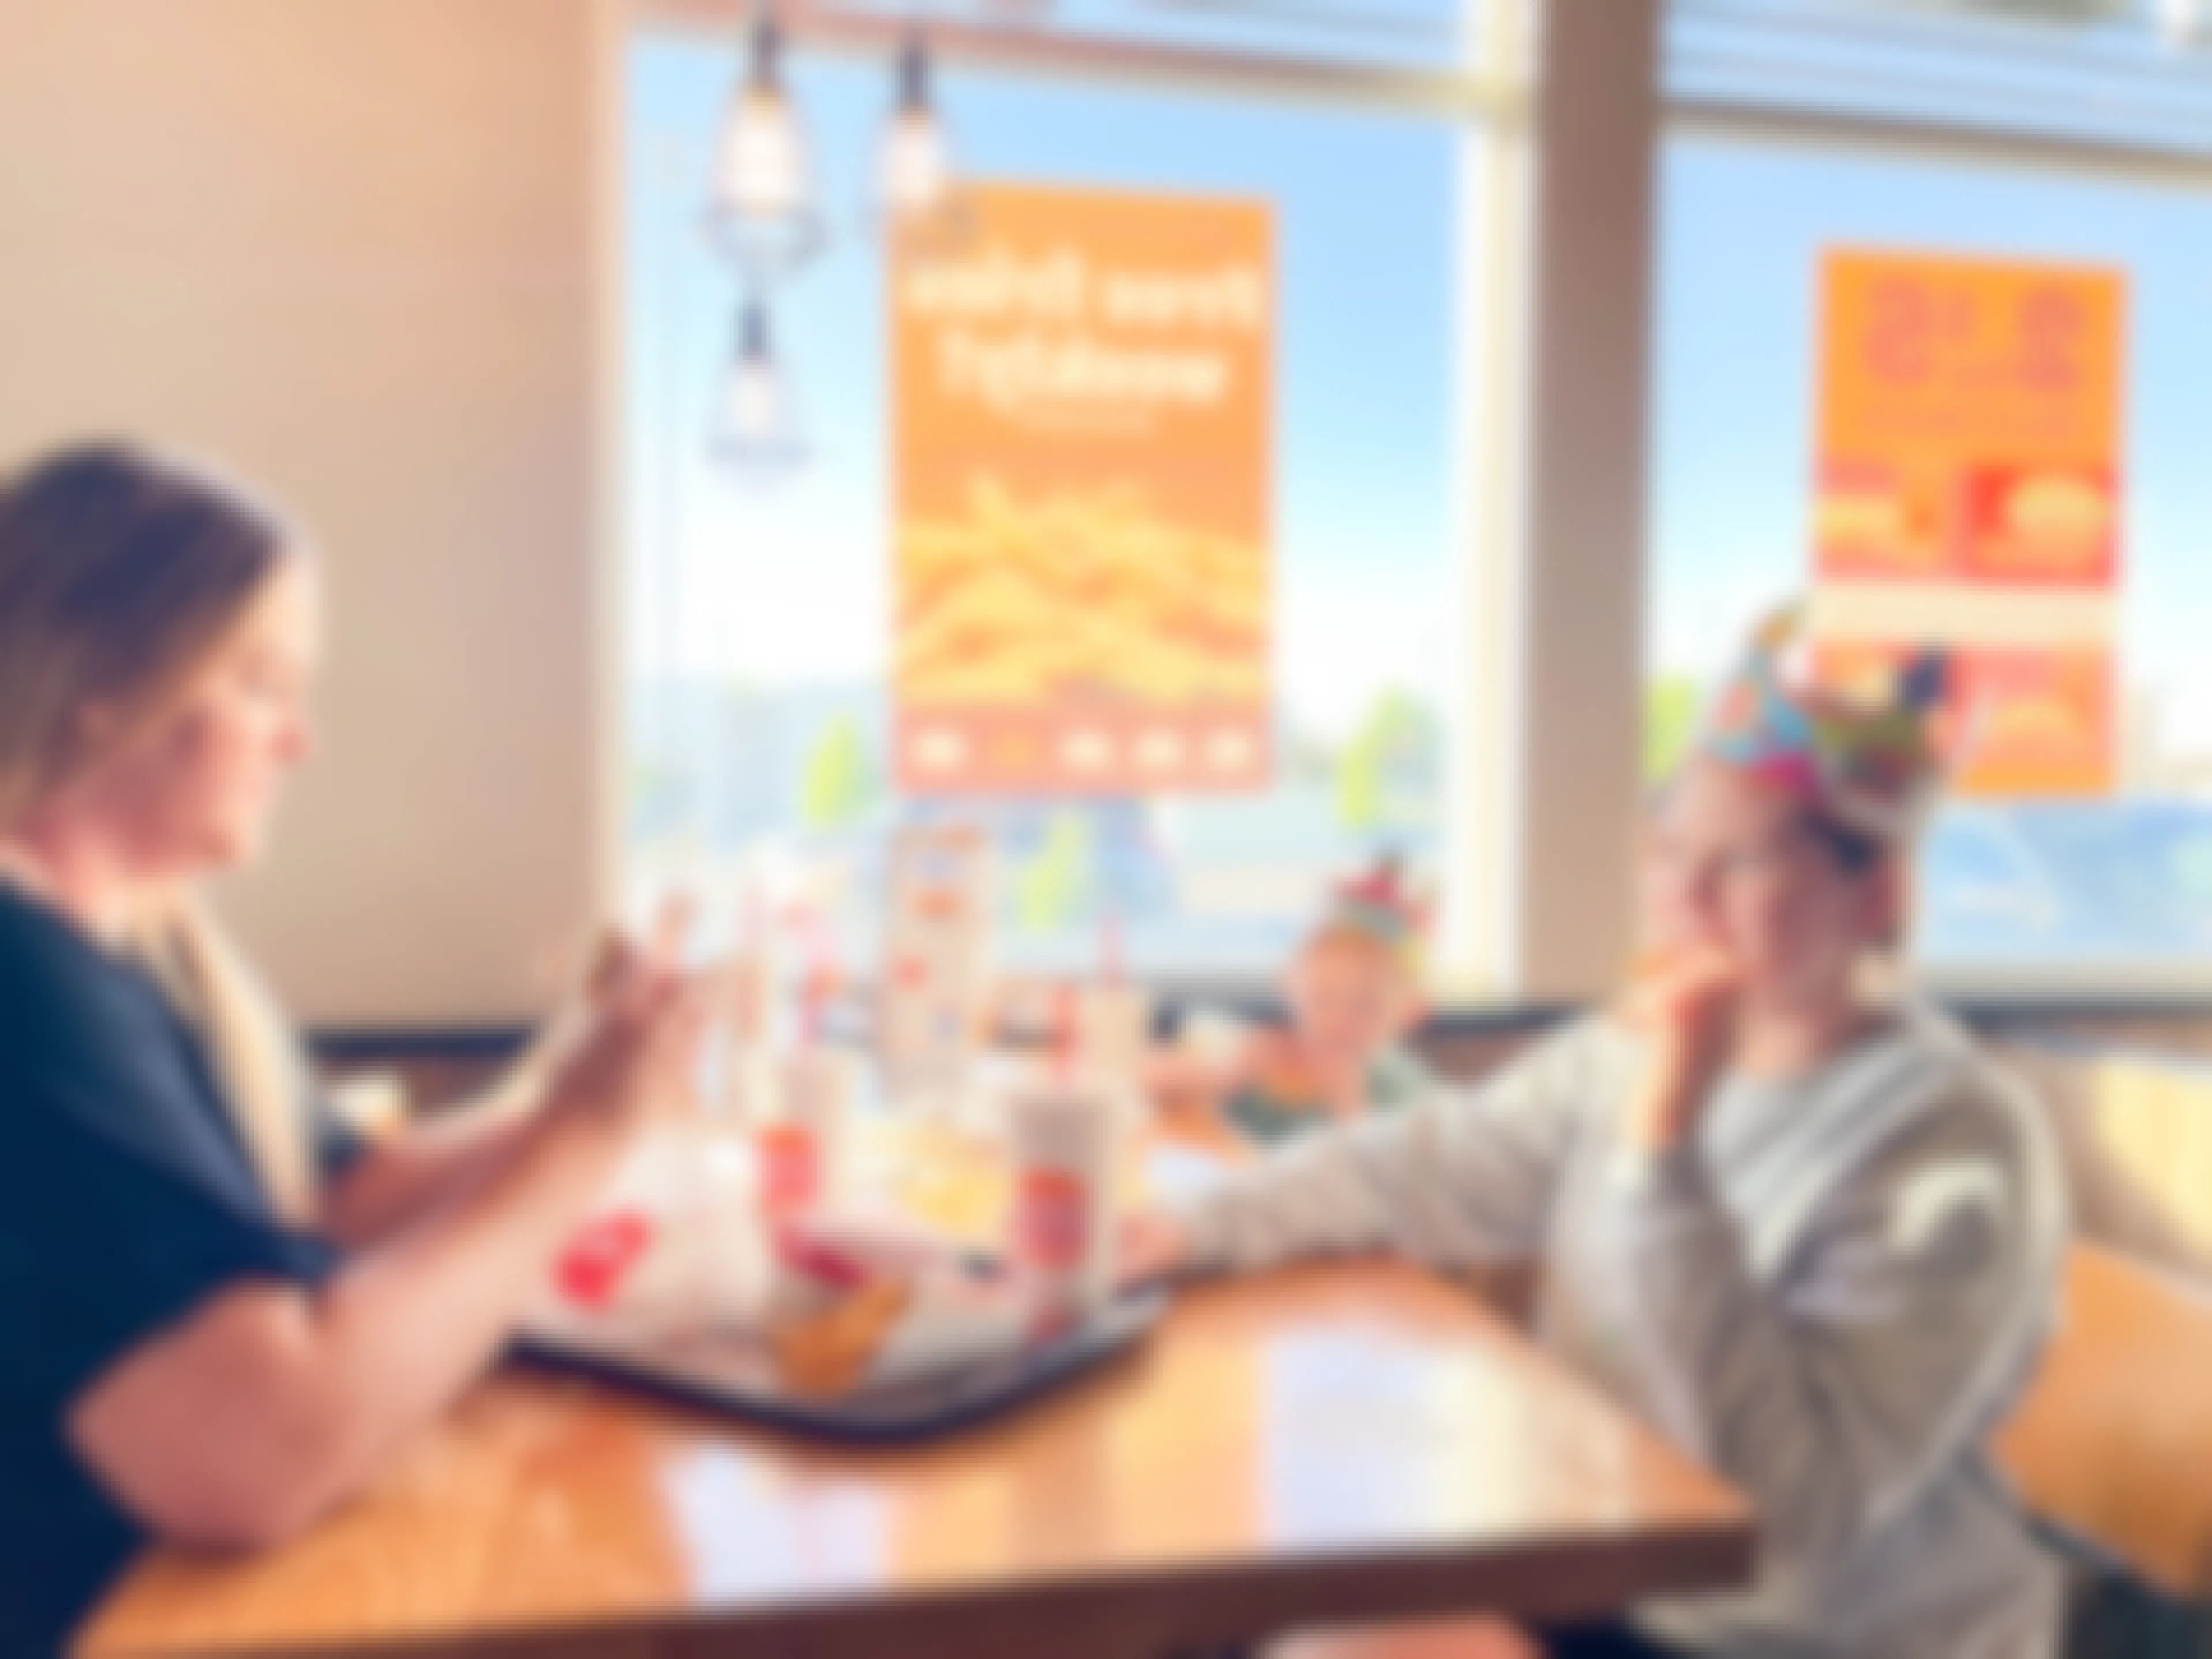 a woman and two kids eating at a table inside burger king